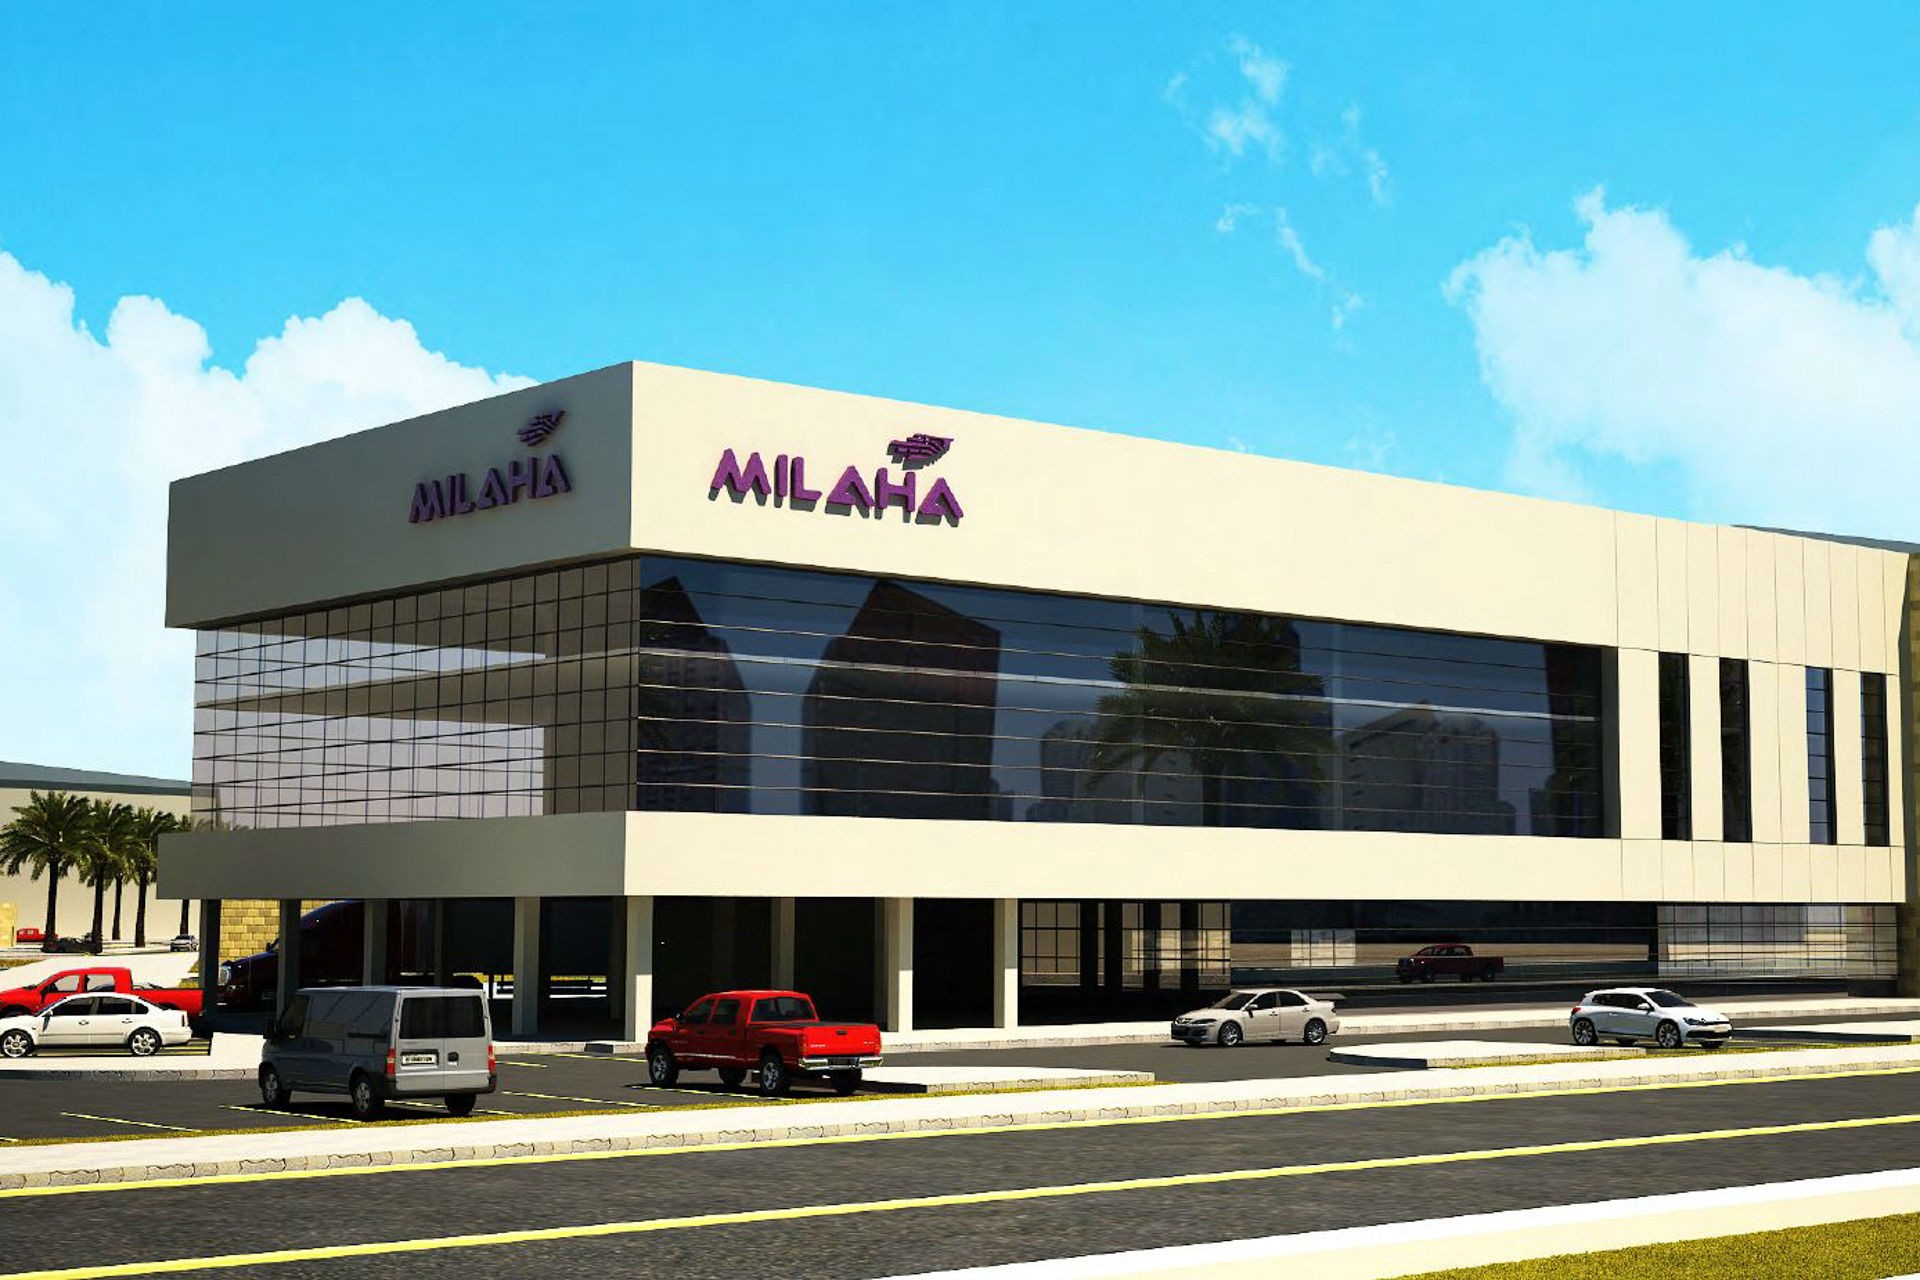 Milaha reorganizes to focus on core business growth - NewsnReleases